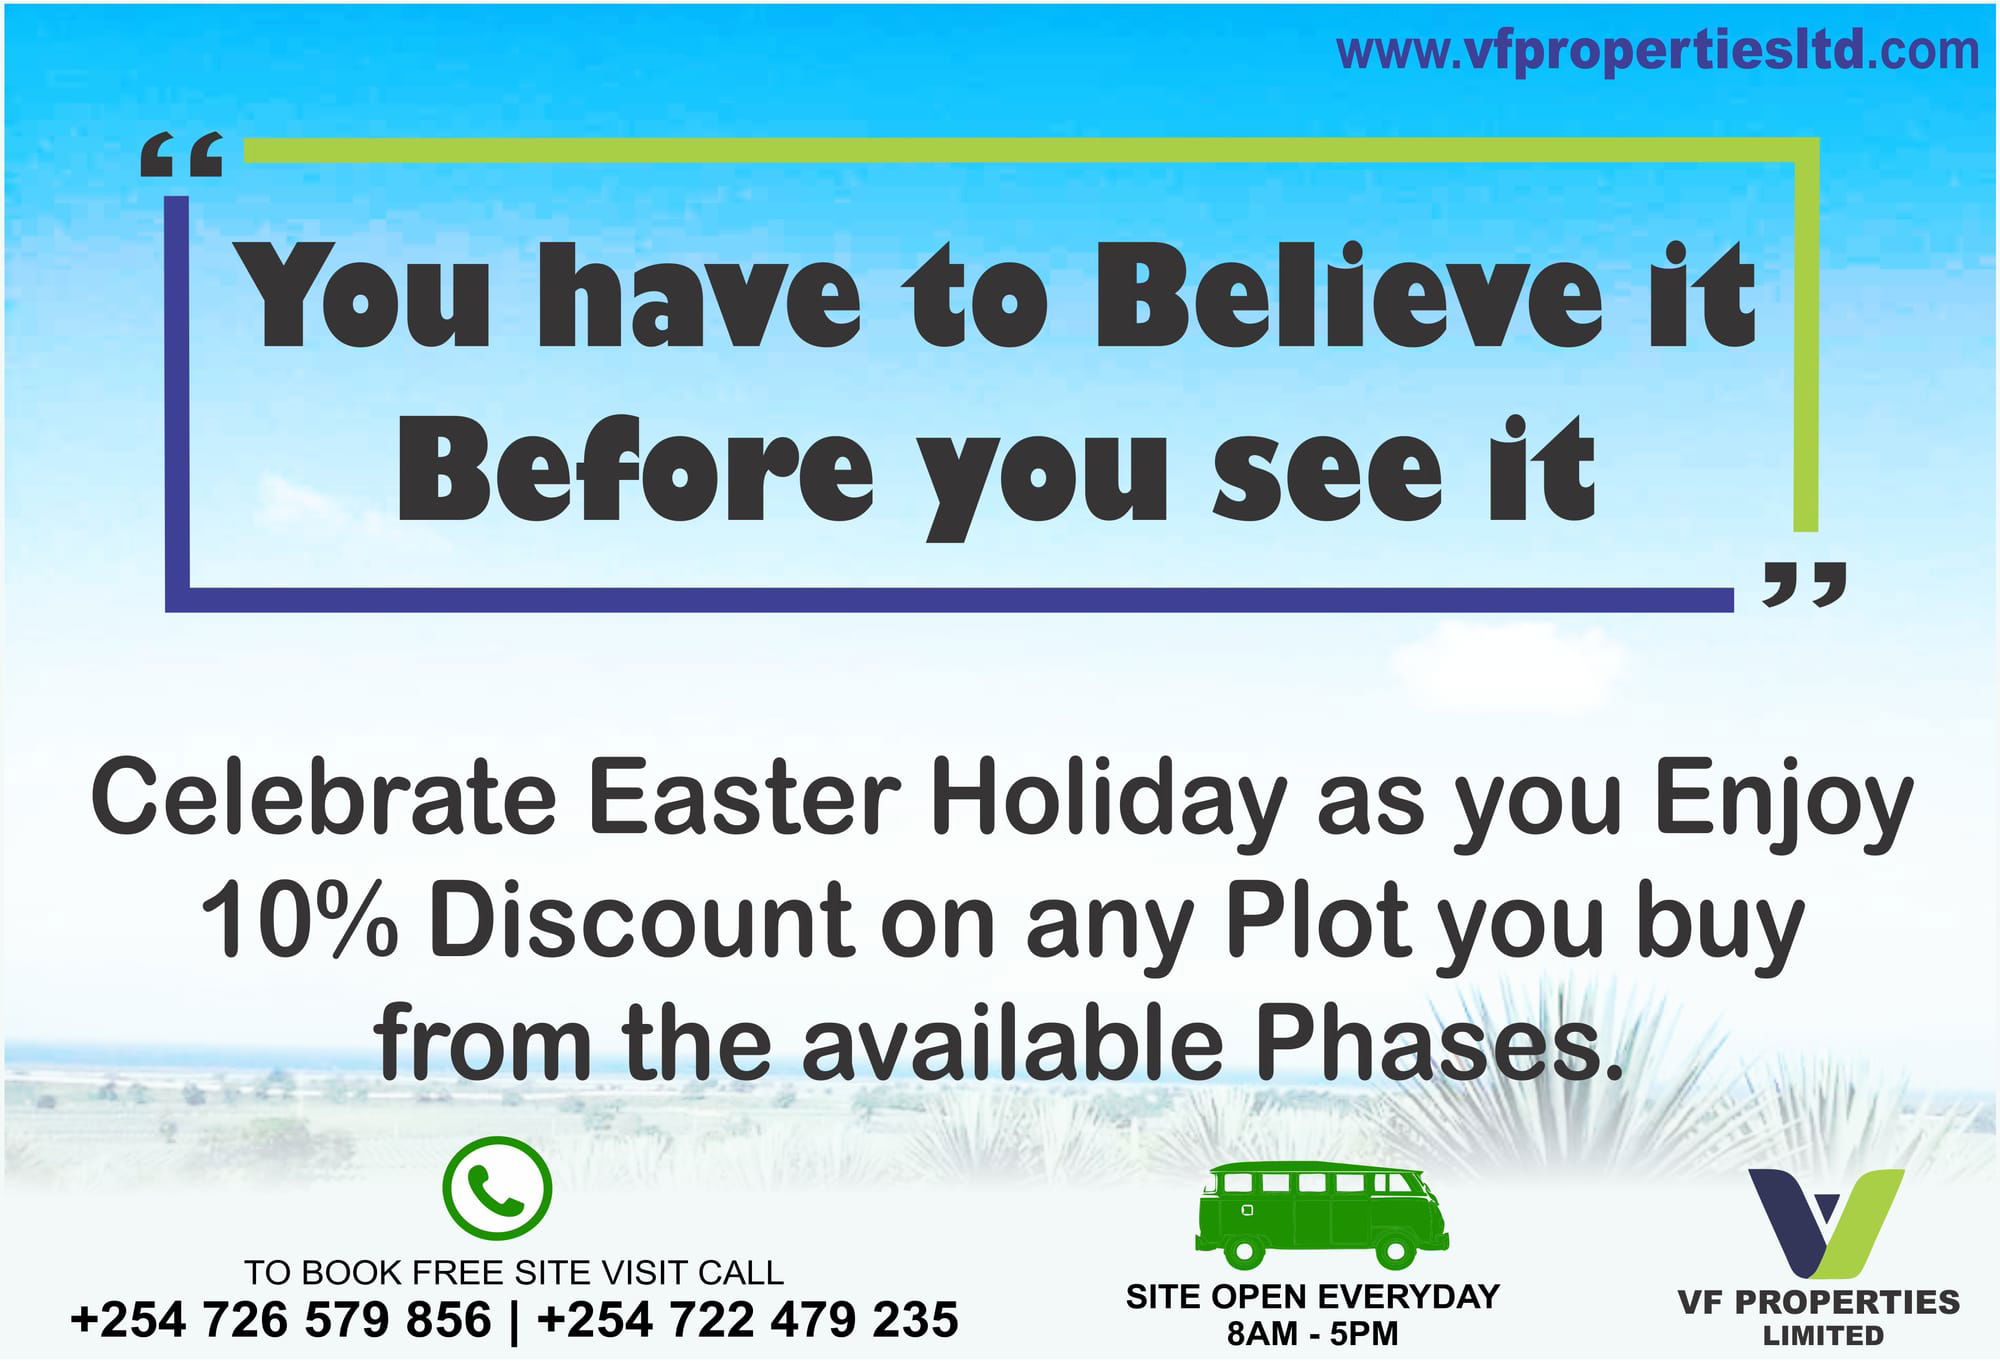 Happy Easter Holidays